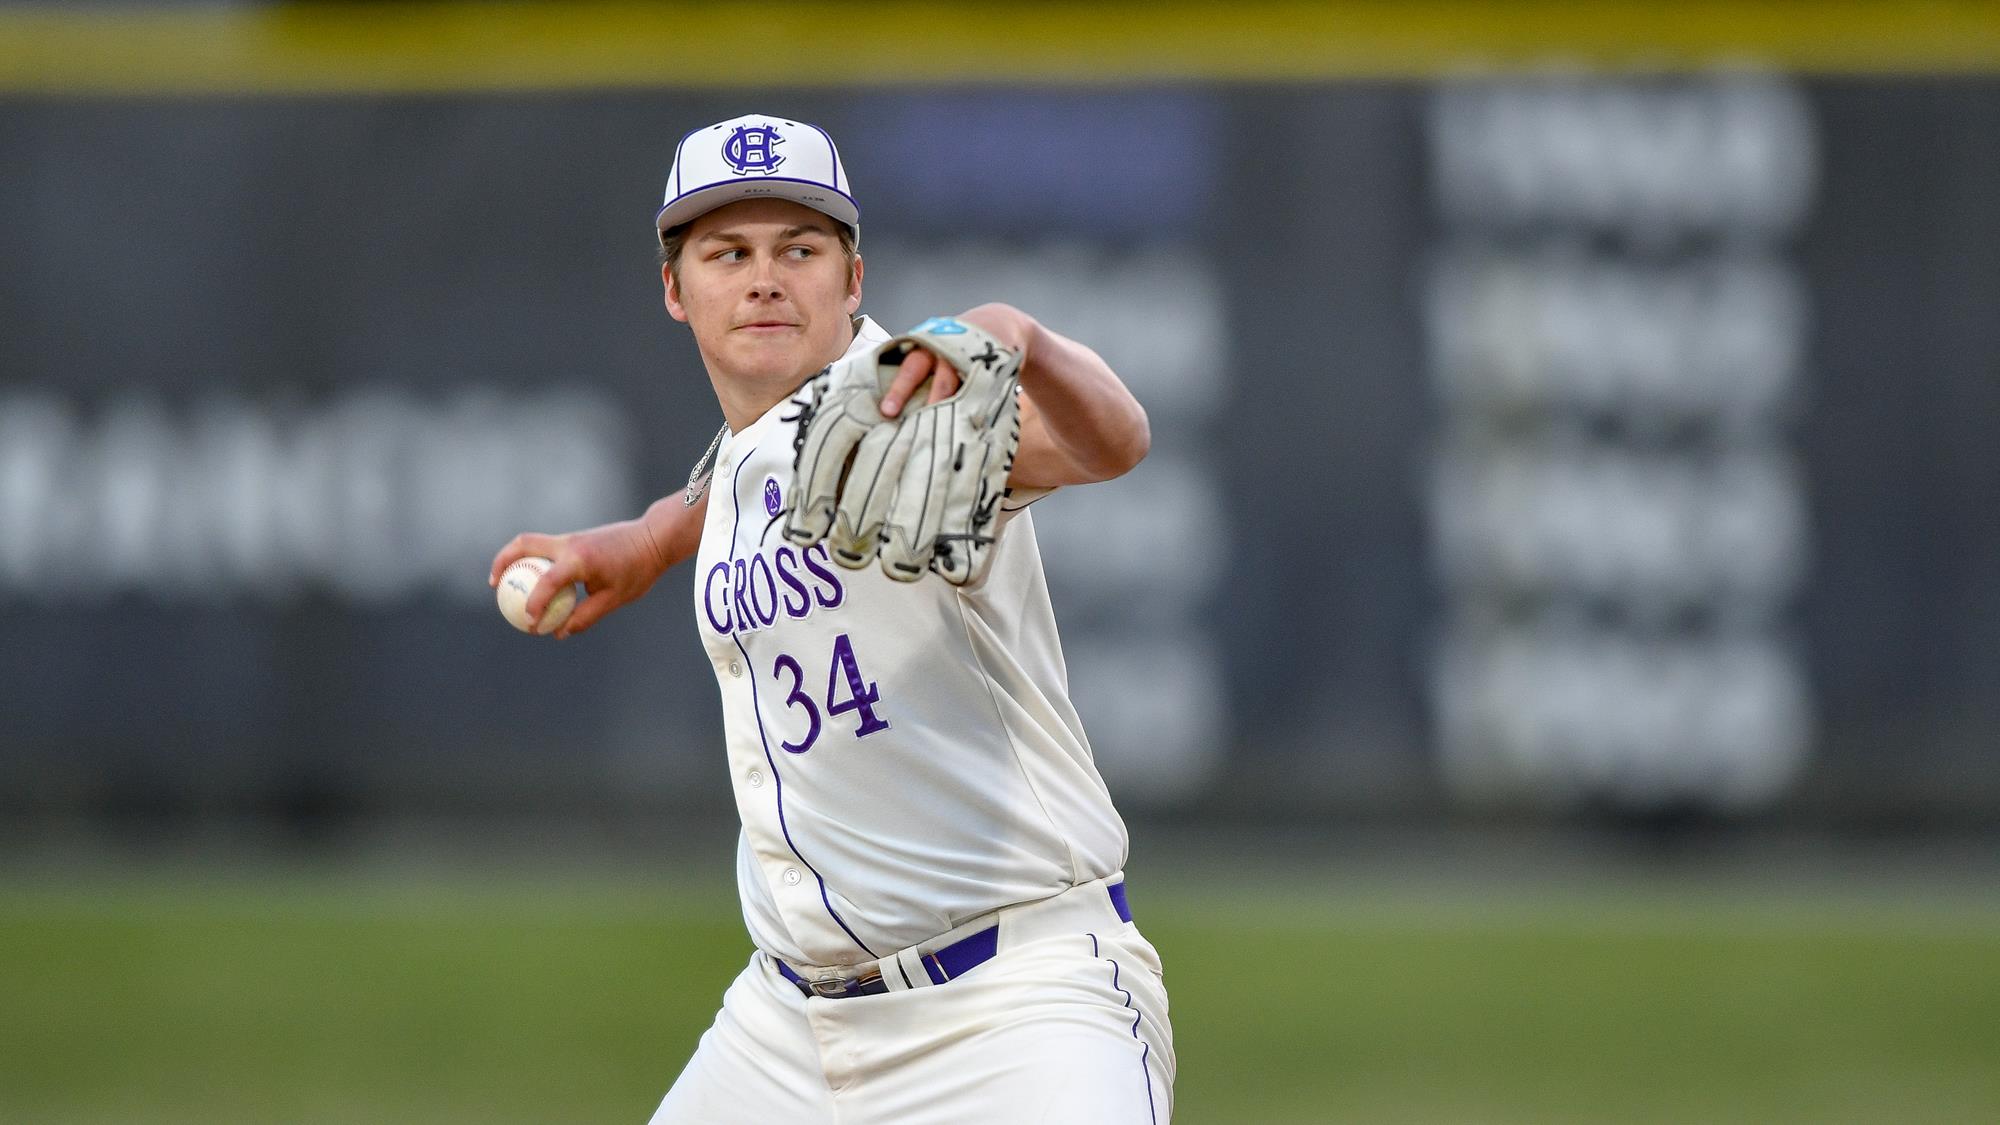 Nashua Silver Knights - Let's welcome right-handed pitcher Aiven Cabral to  the 2022 Silver Knights! Cabral will join fellow Huskies Bozzo and  Musacchia at Holman Stadium this summer before heading to Northeastern